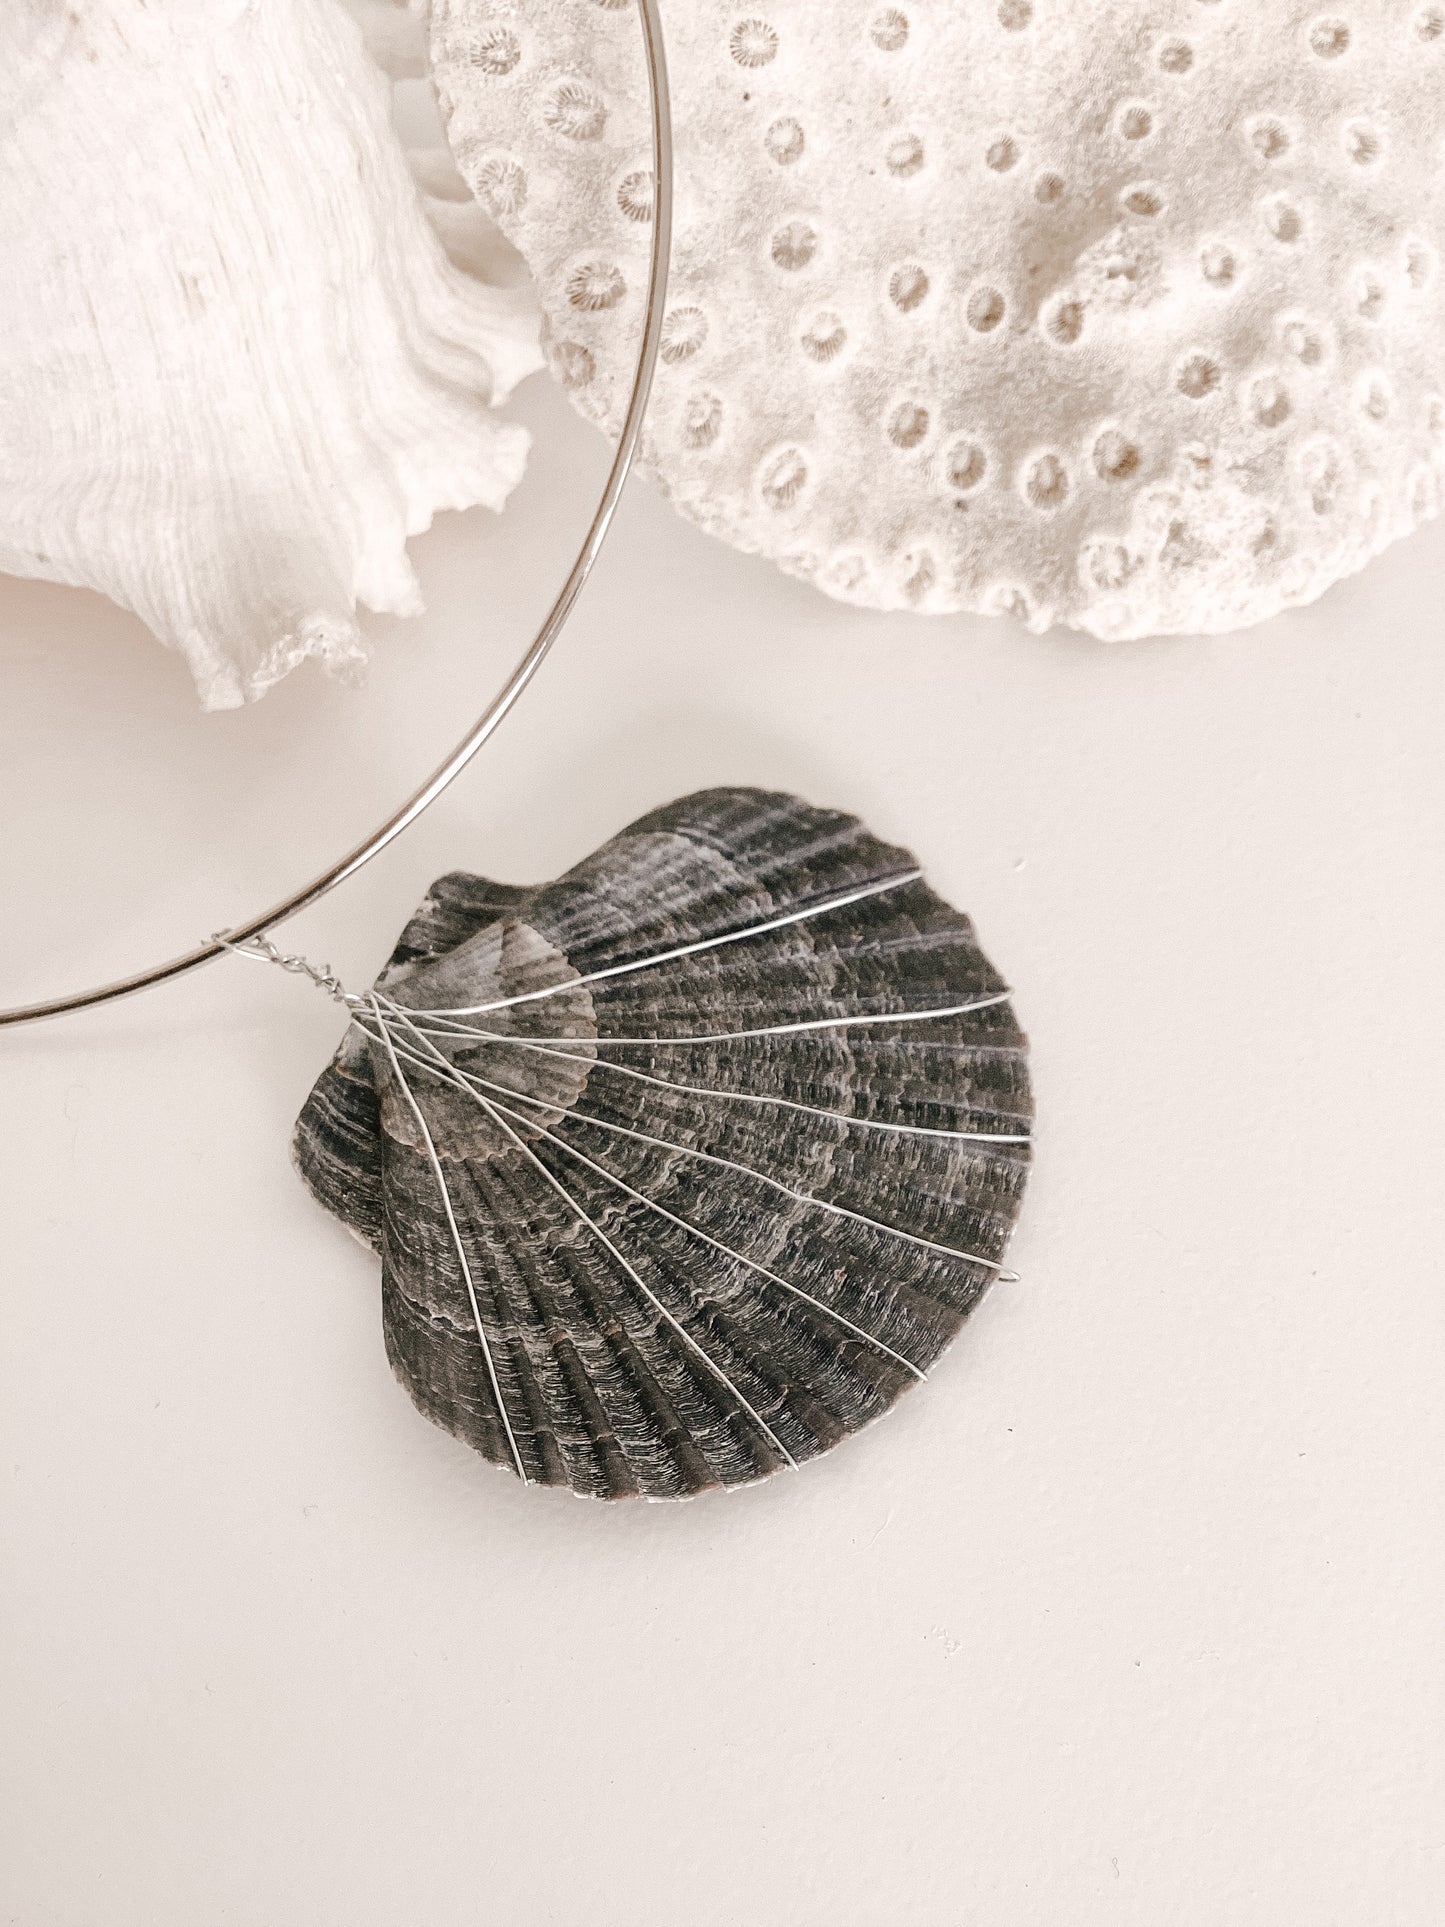 Clam Shell Necklace